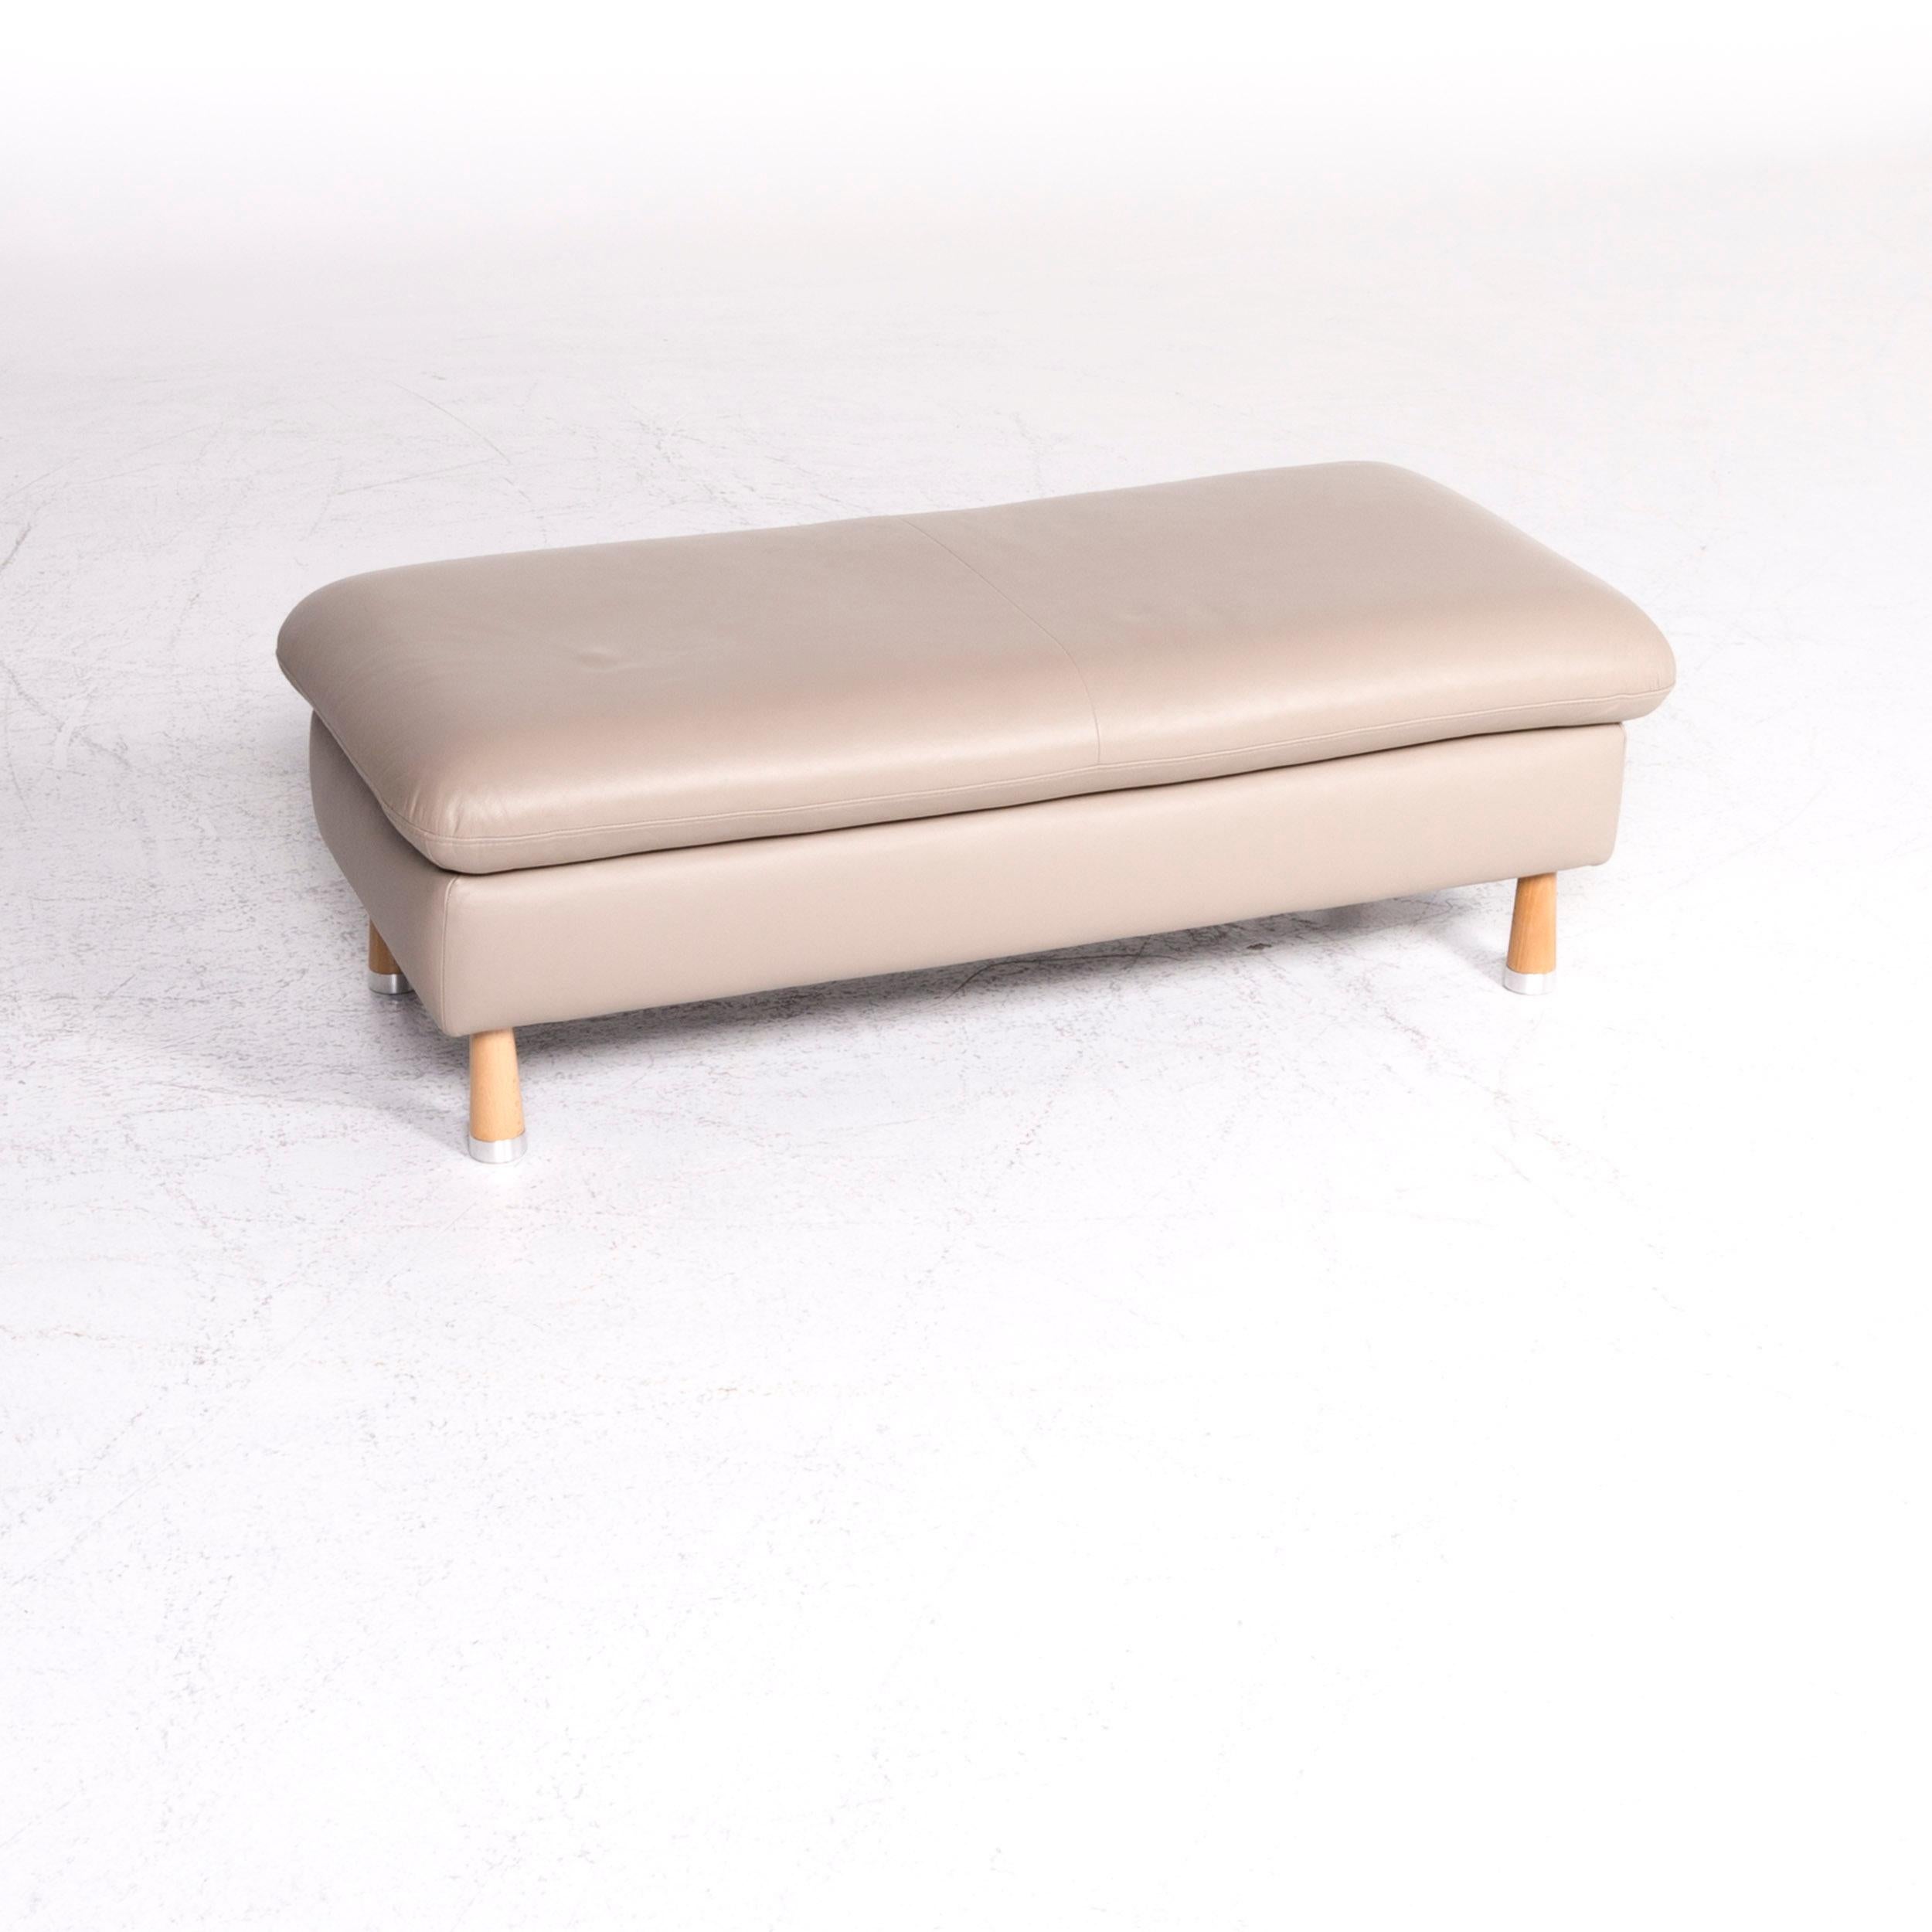 We bring to you a Willi Schillig designer leather stool beige stool.

Product measurements in centimeters:

Depth 58
Width 116
Height 42.





 